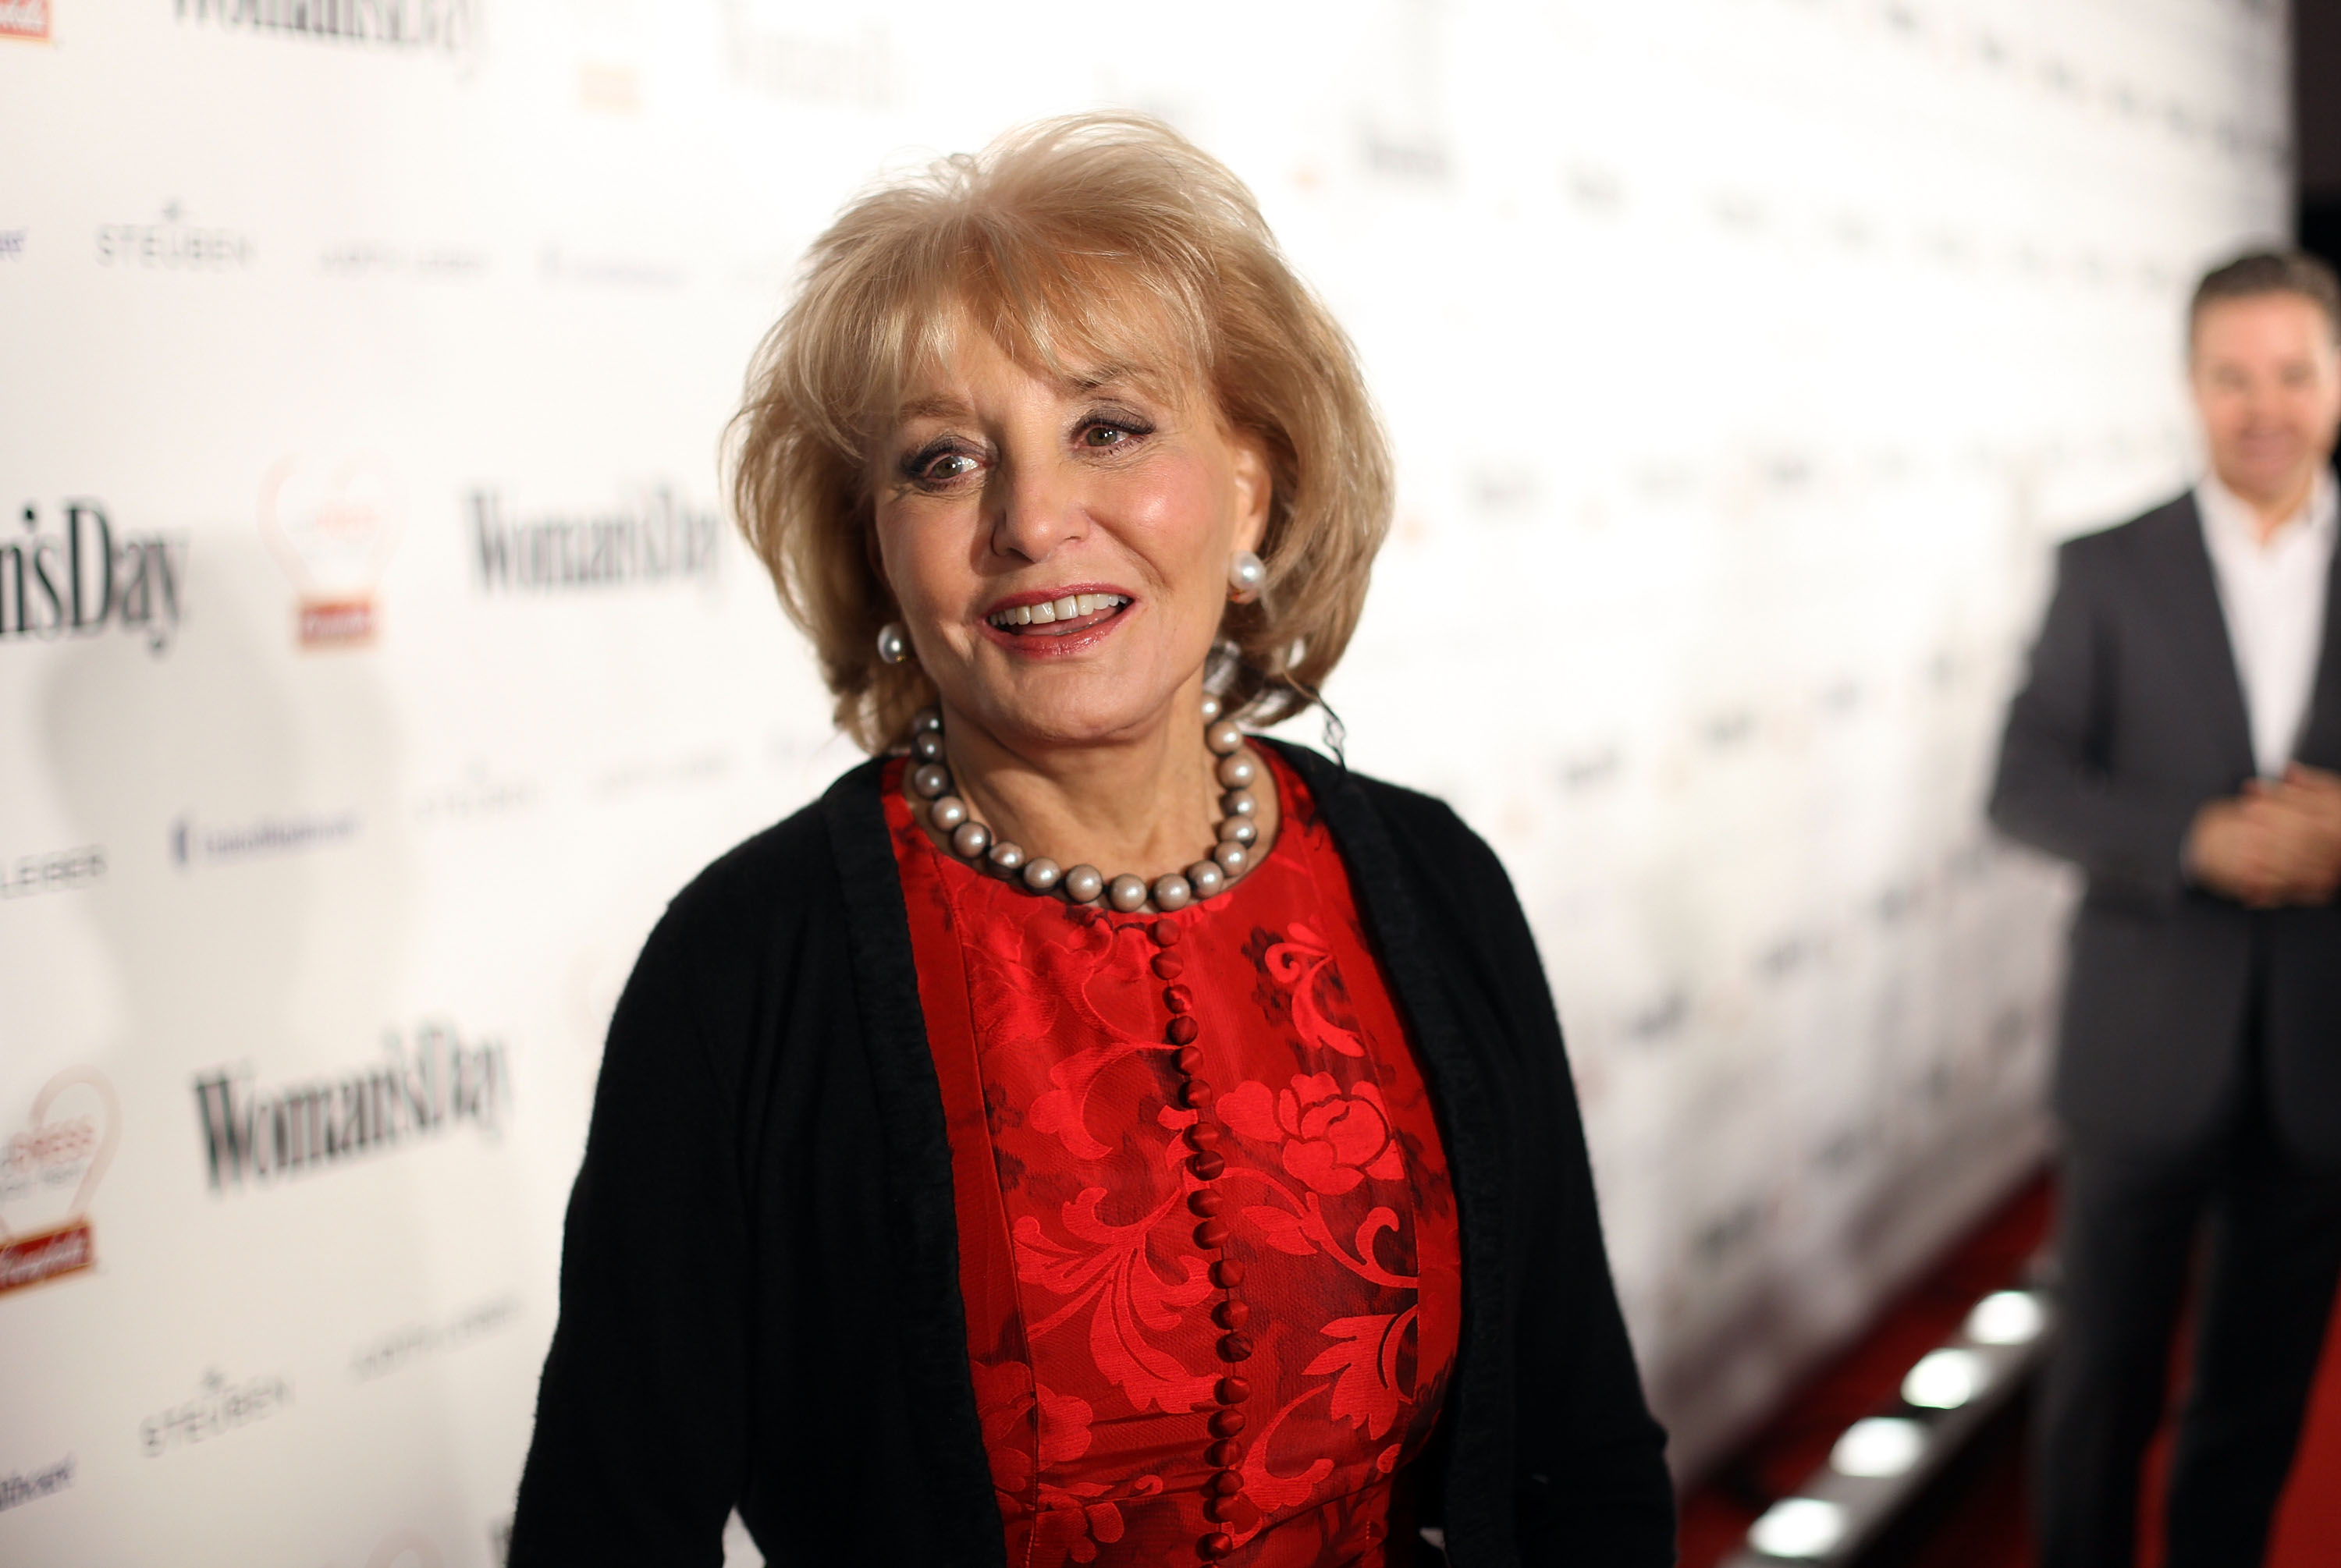 Reactions Pour In as People Mourn ‘Trailblazer' Broadcasting Icon Barbara Walters